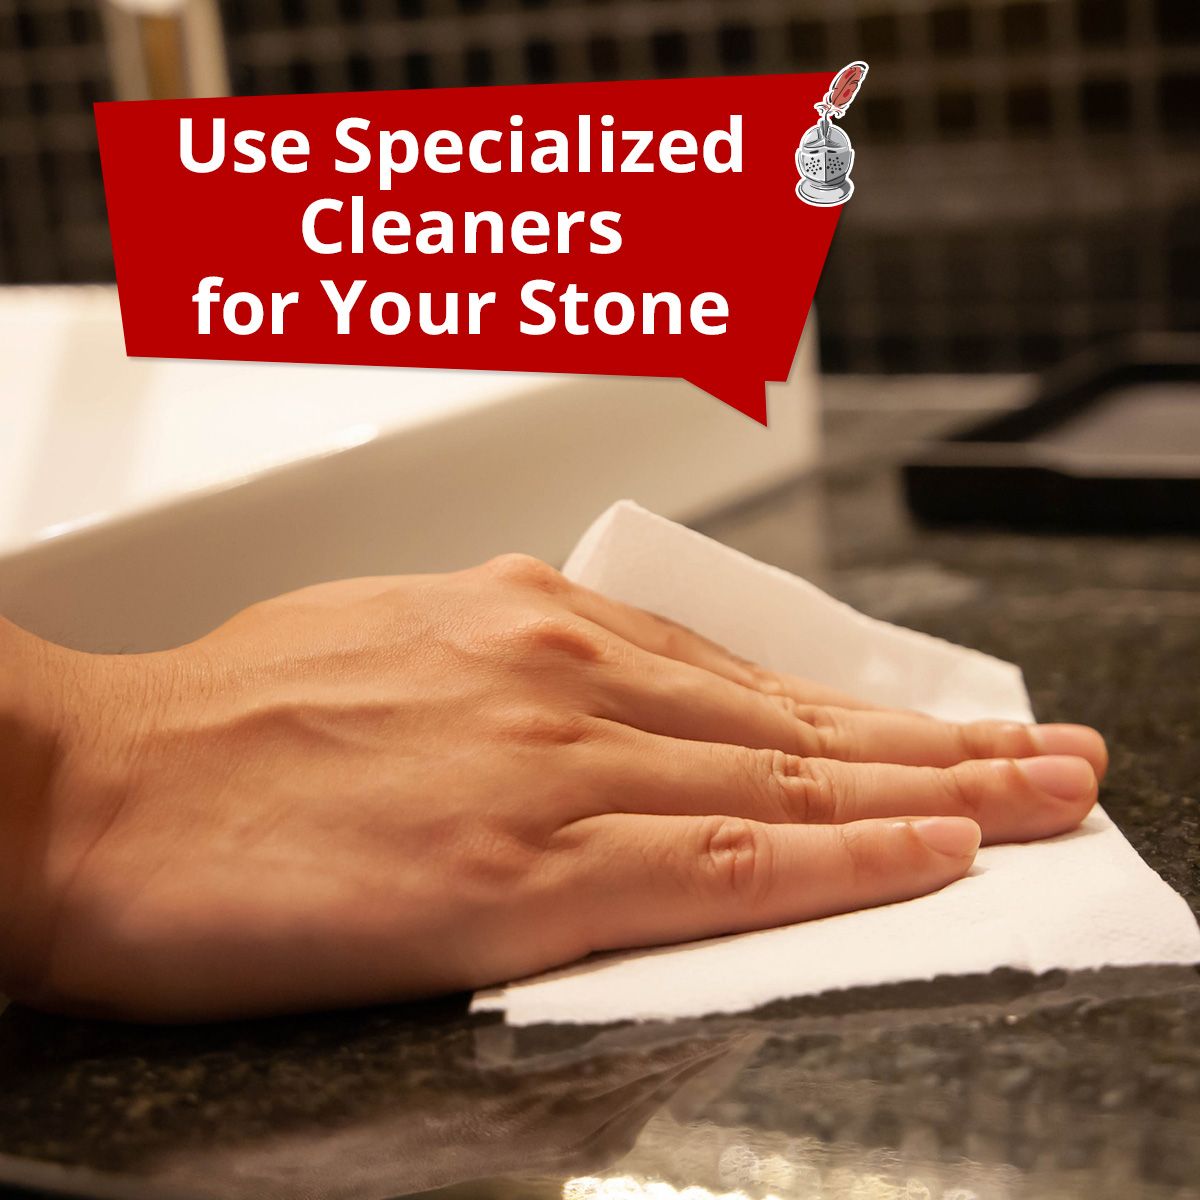 Use Specialized Cleaners for Your Stone